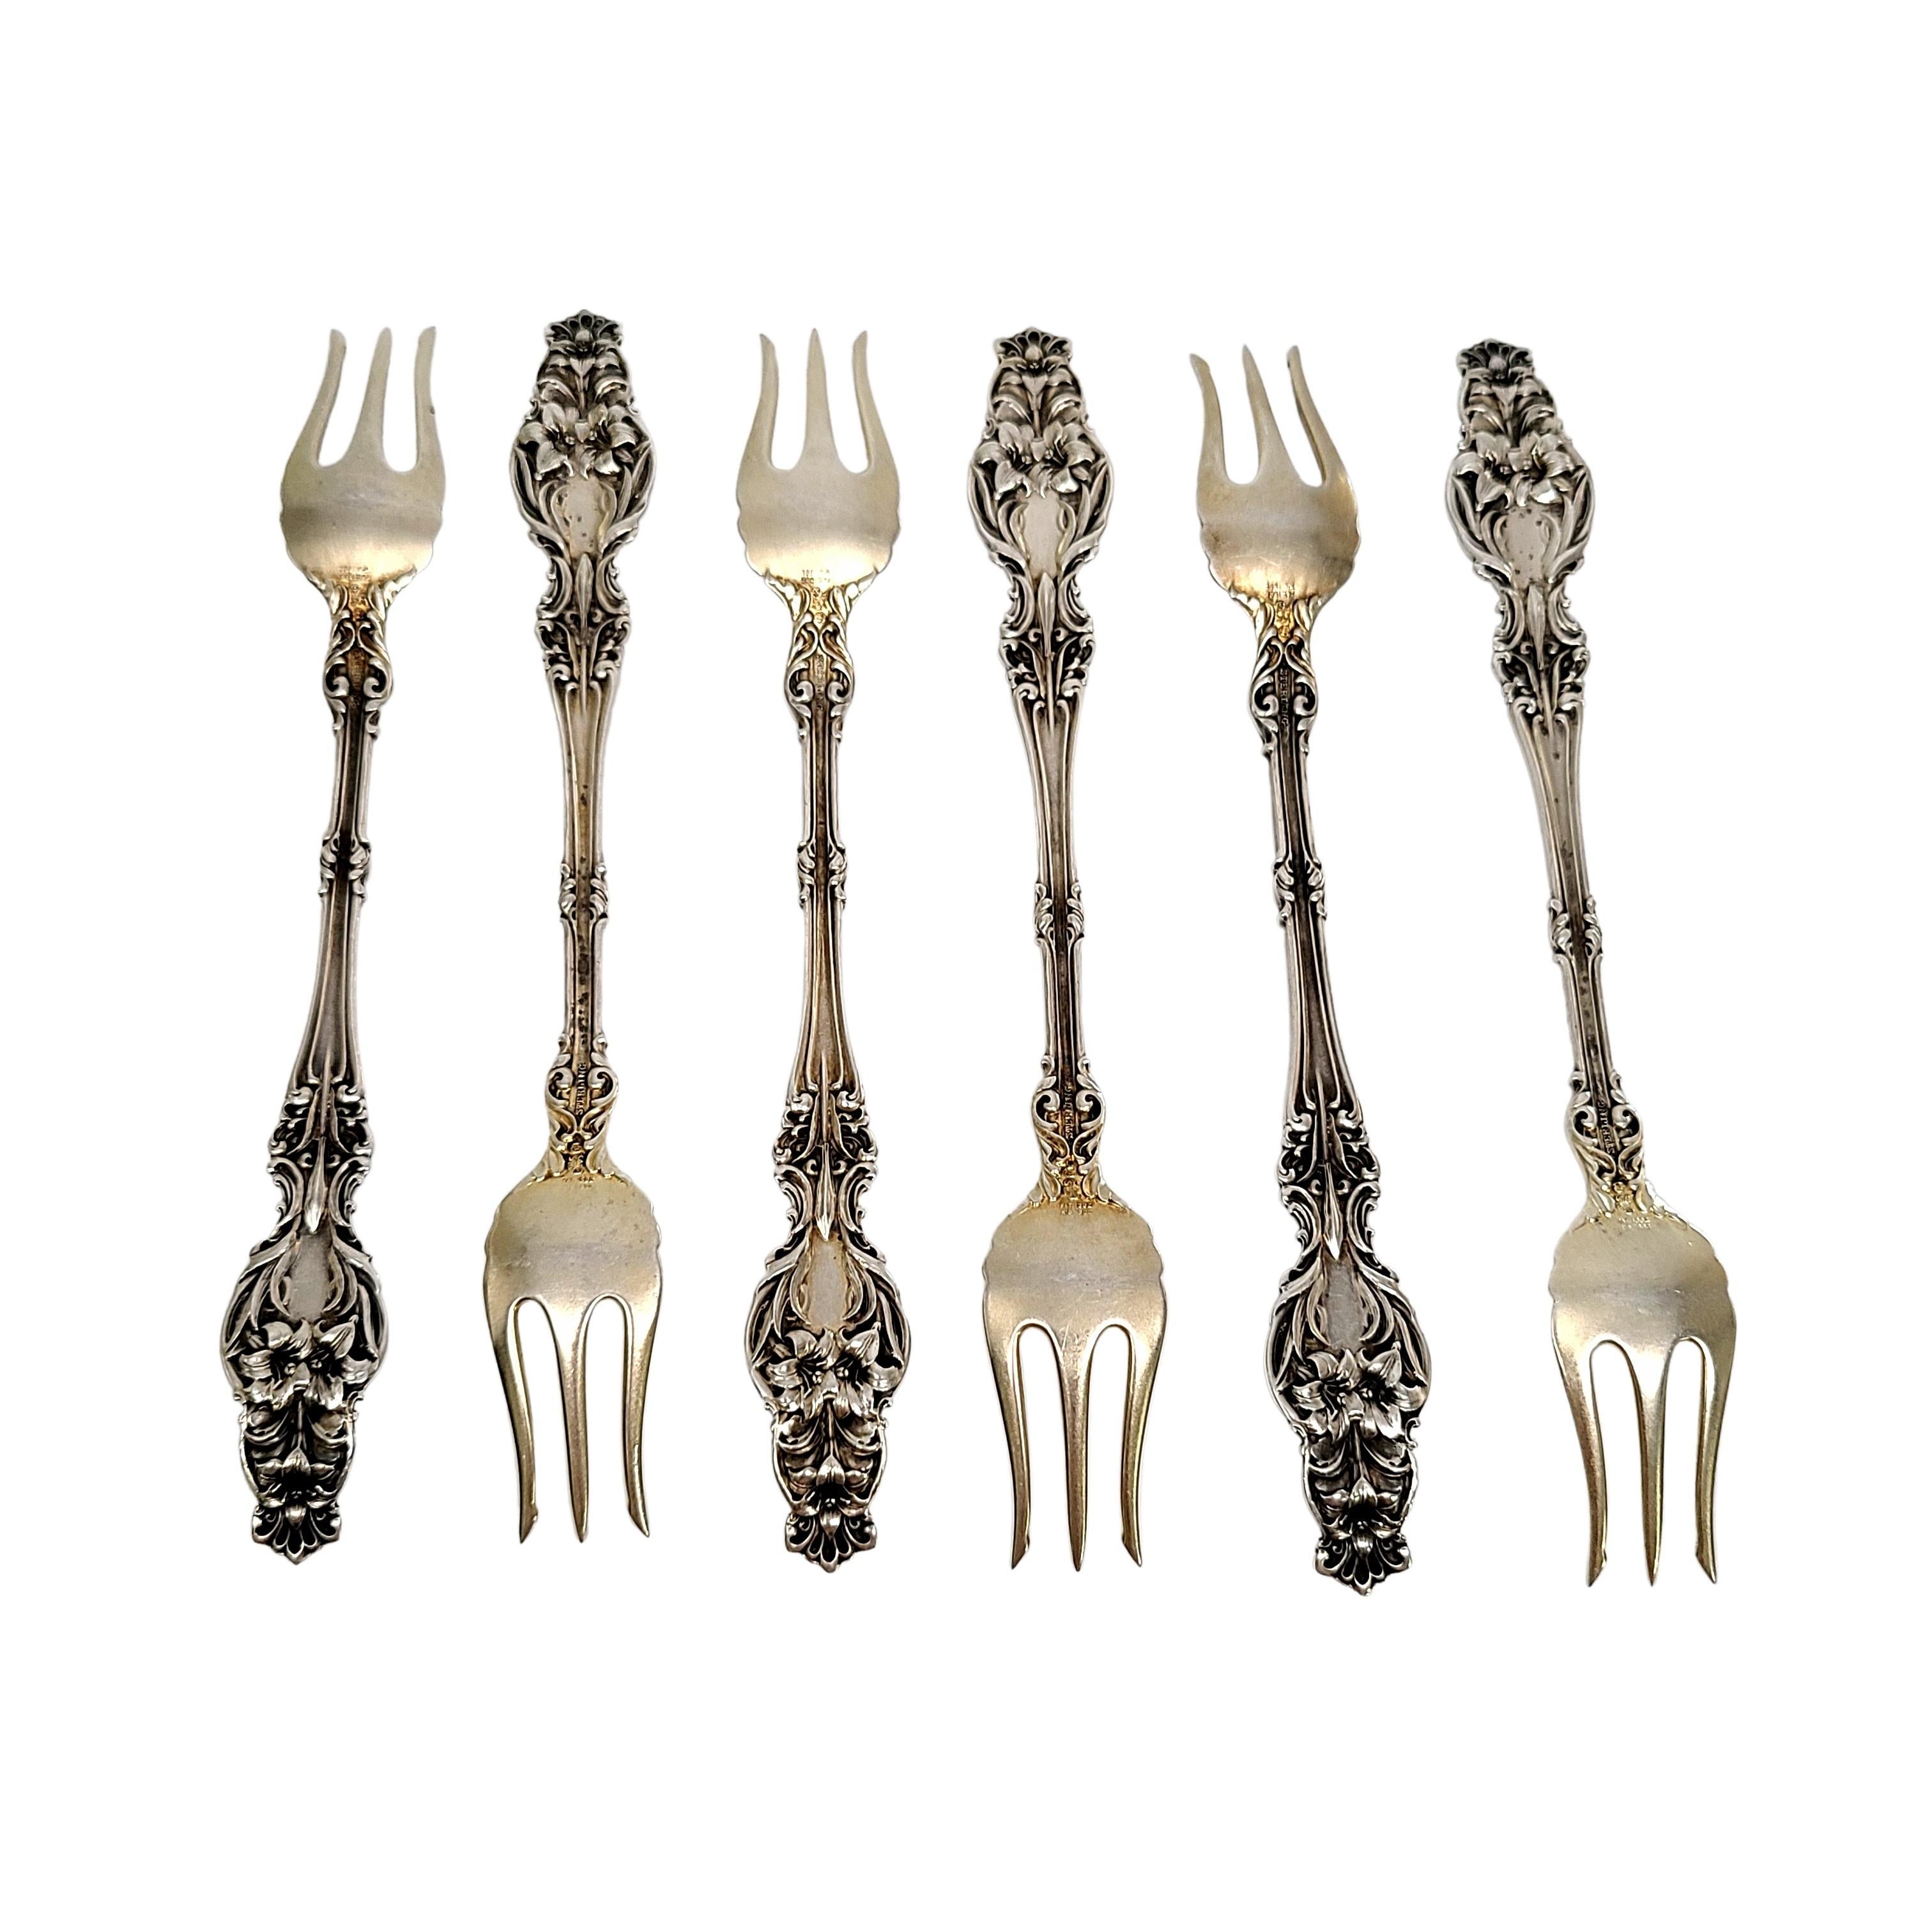 Set of 6 sterling silver cocktail forks in the Lily pattern by Frank Whiting.

Monogram appears to be G

Beautifully ornate set of forks in the Lily pattern with gold washed tines.

Measures approx 5 3/4